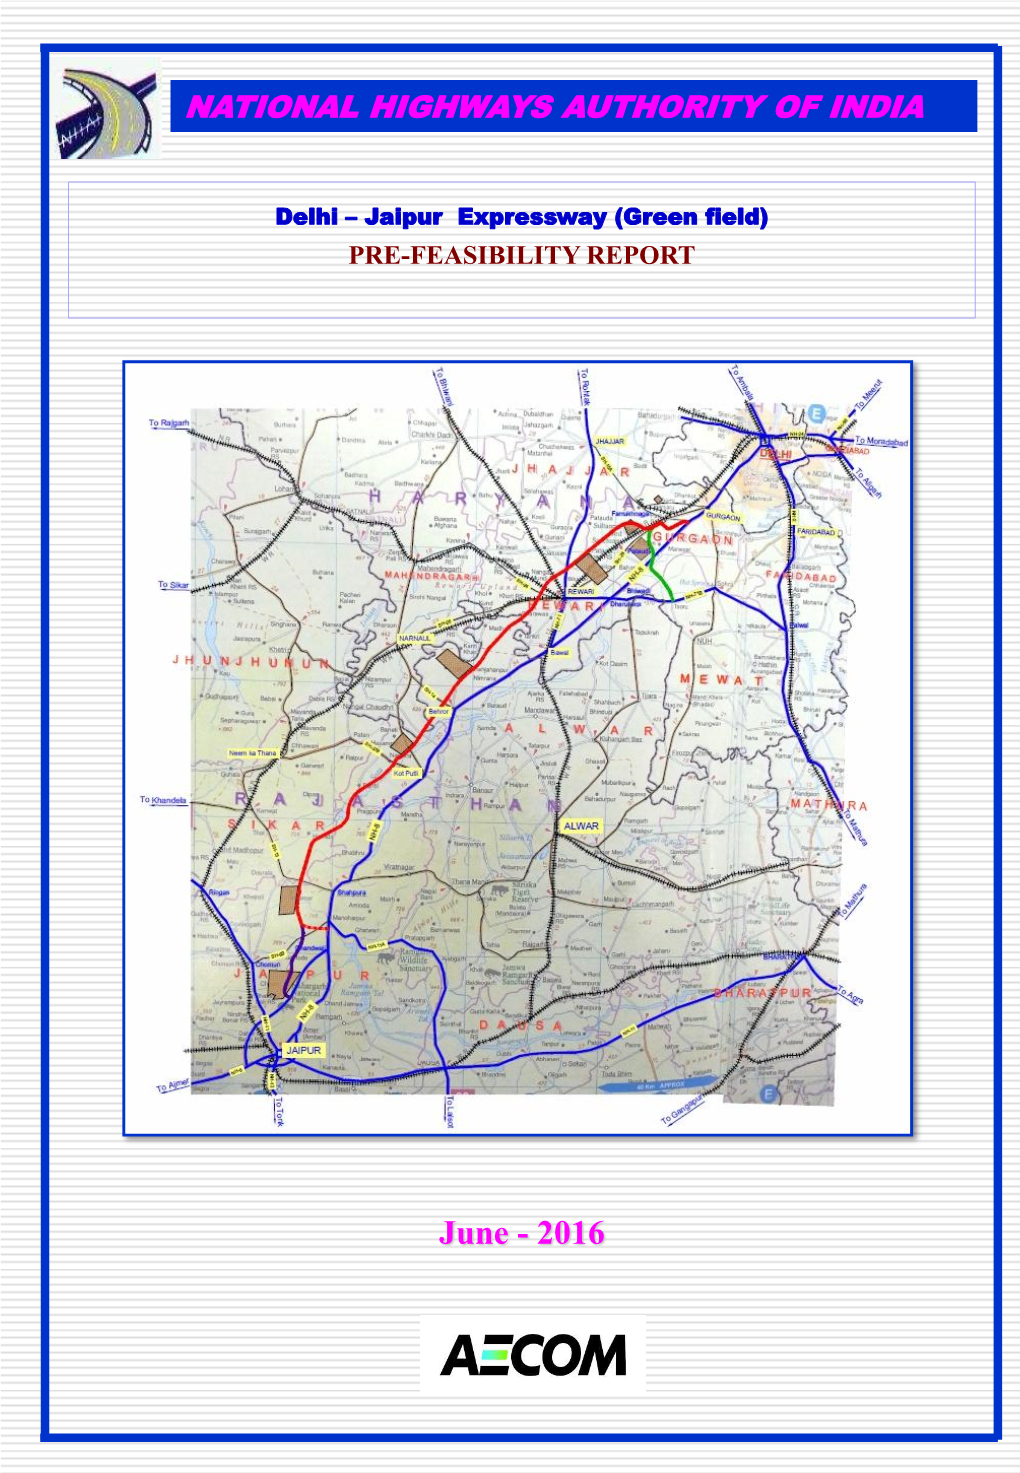 June - 2016 Delhi-Jaipur Expressway (Greenfield) Project Pre-Feasibility Report